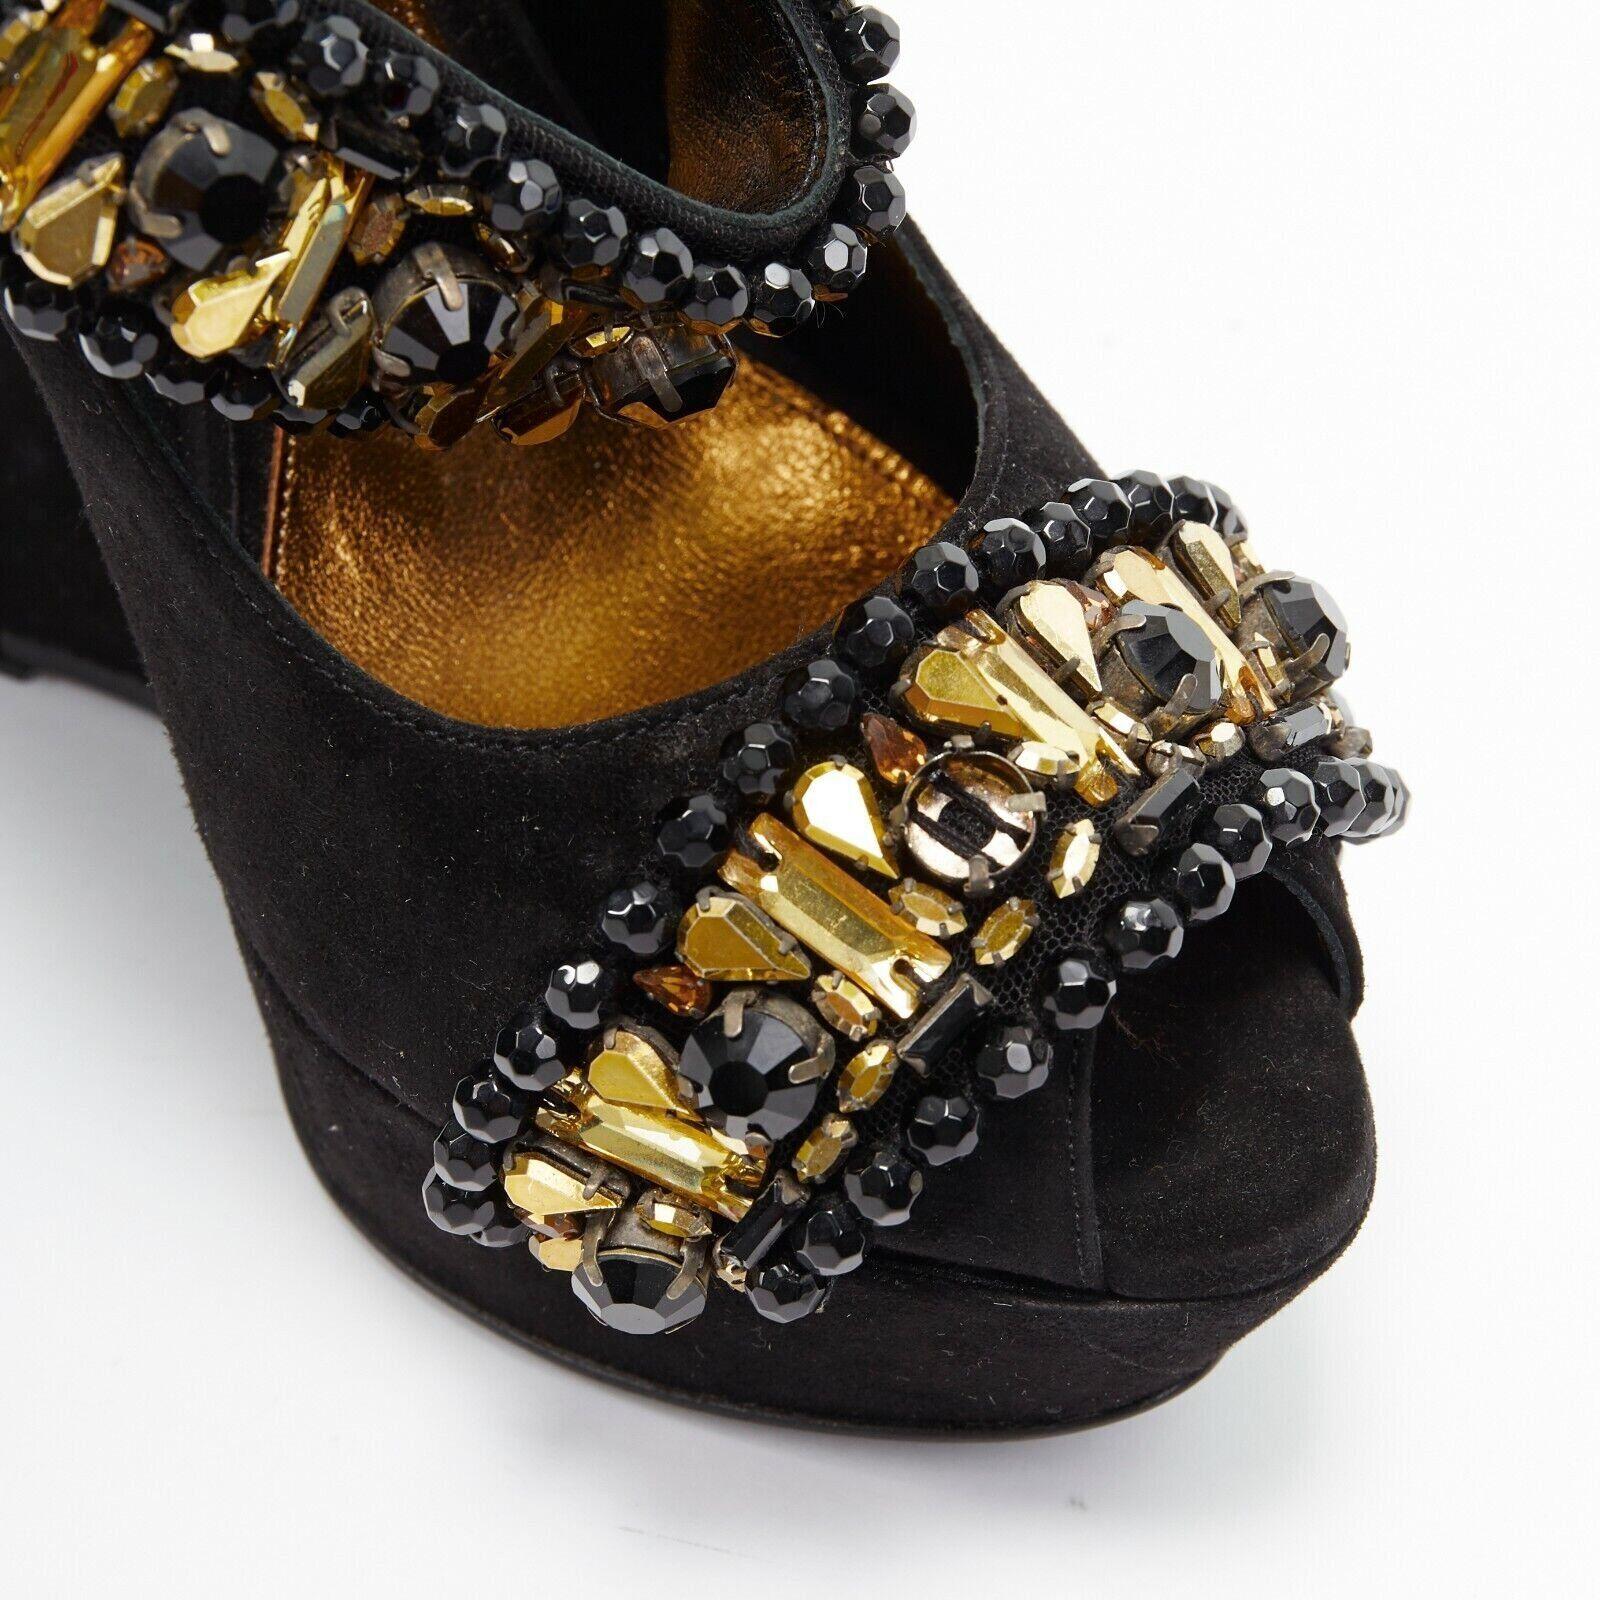 New Alexander McQueen Black Champagne Embellished Wedge Shoes Italian 38 For Sale 2